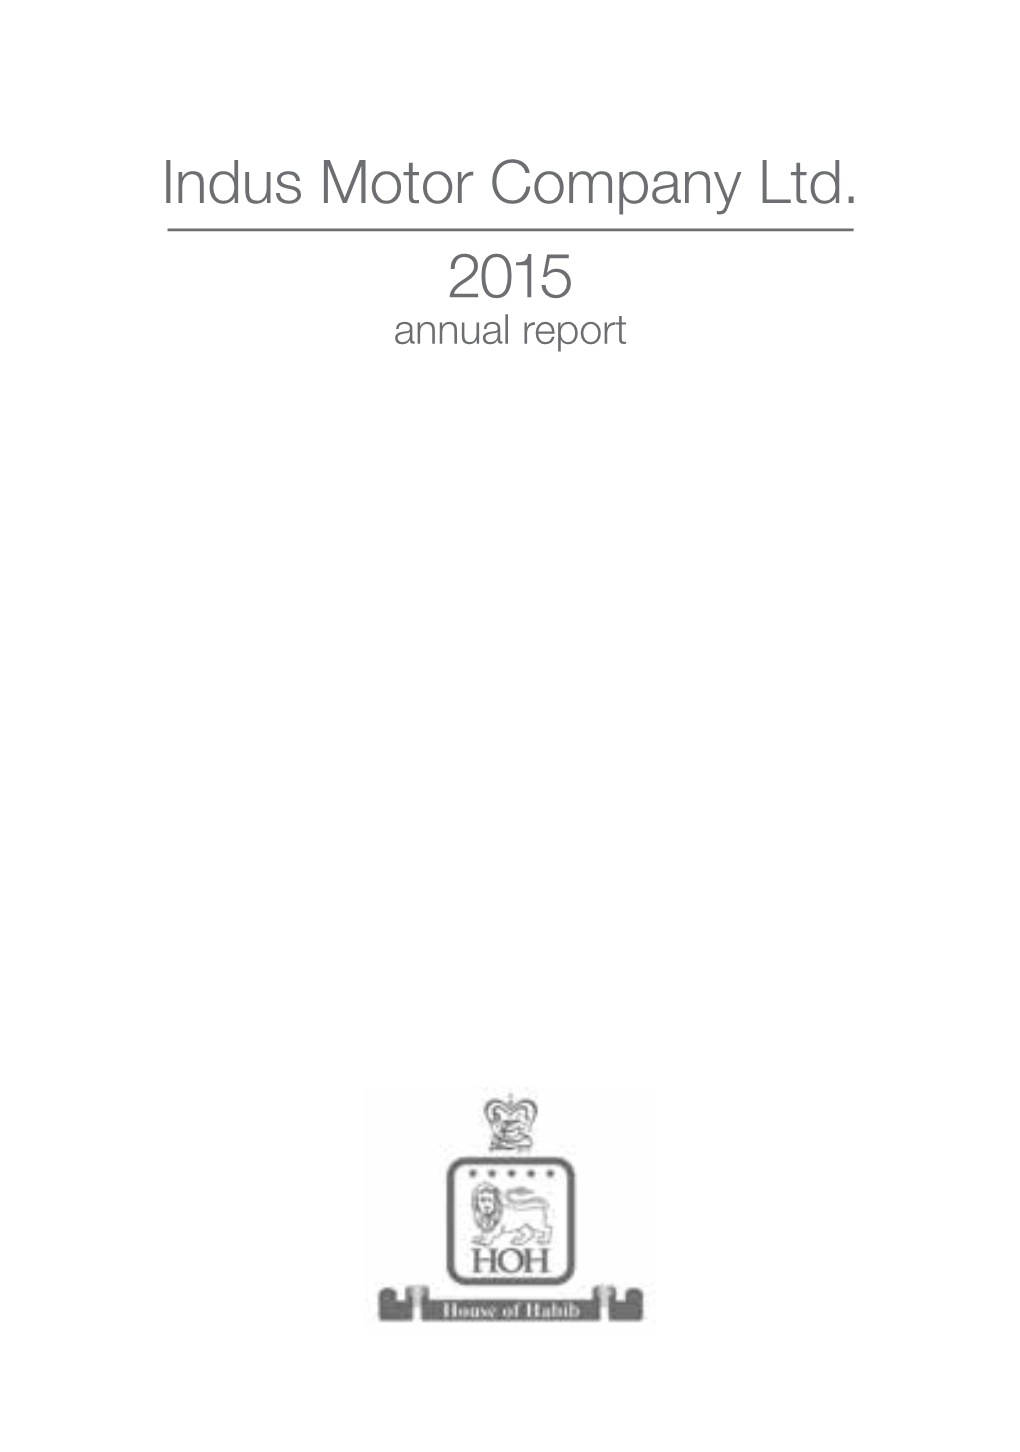 Indus Motor Company Ltd. 2015 Annual Report a Journey of Continuous Commitment Indus Motor Company Ltd